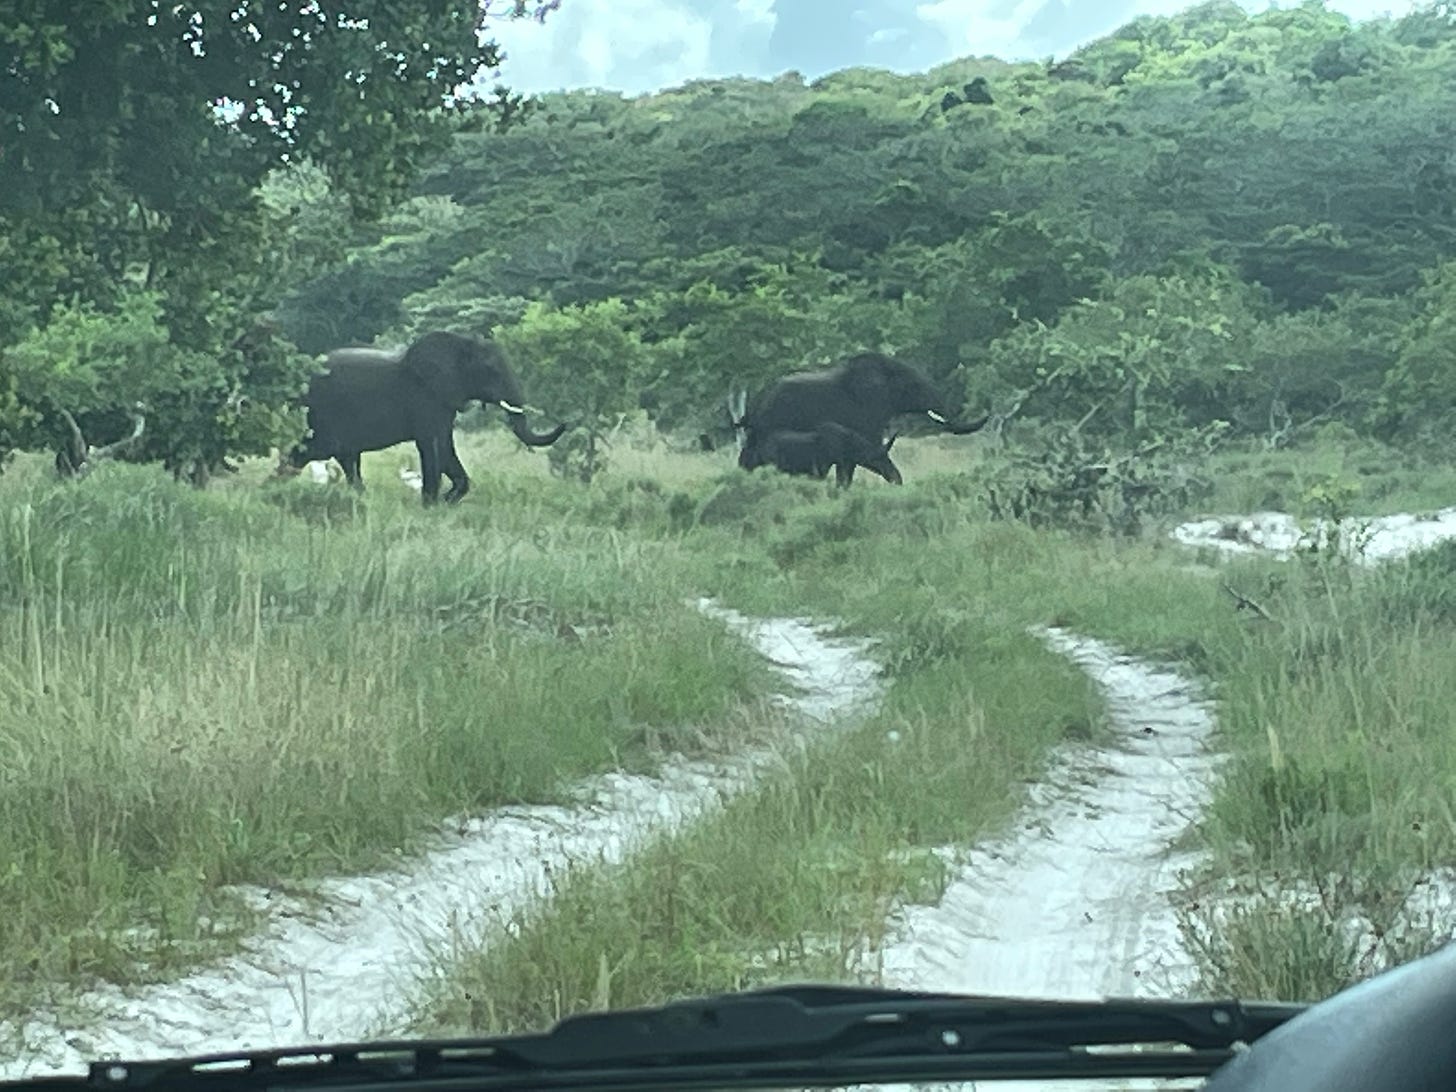 Elephant crossing in Maputo Special Reserve, Mozambique.